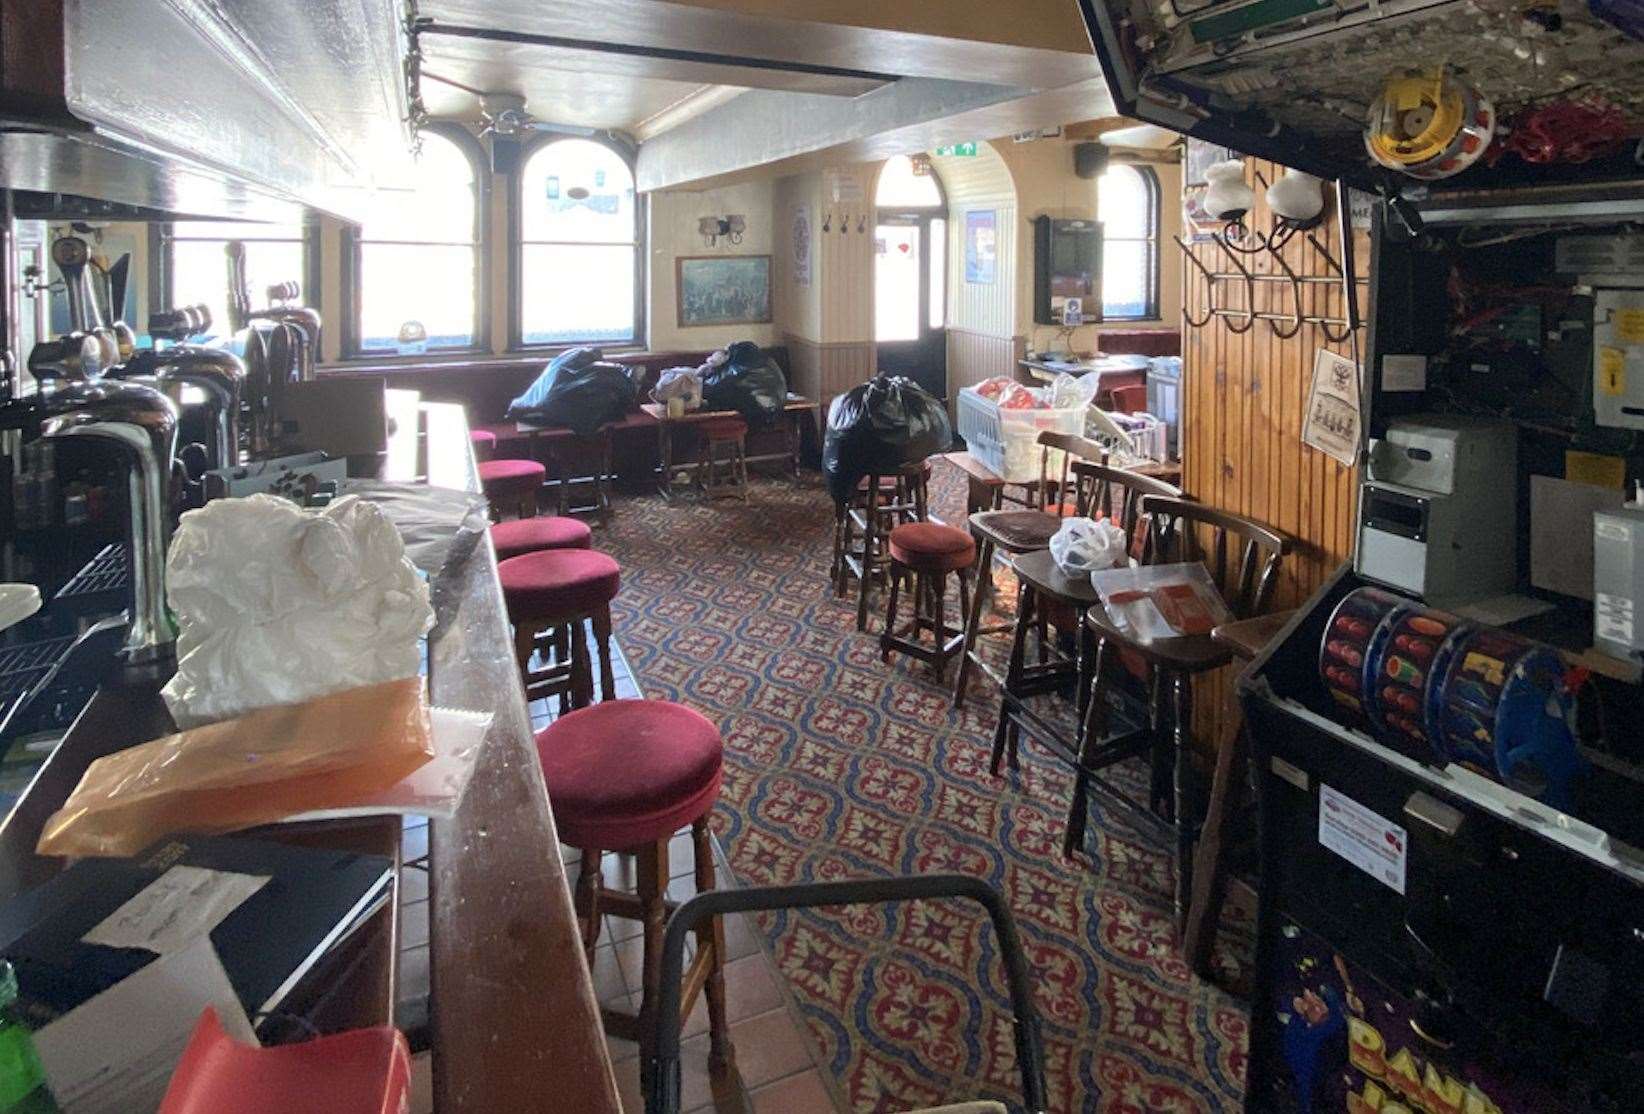 The interior of the pub will be cleared out and completely transformed